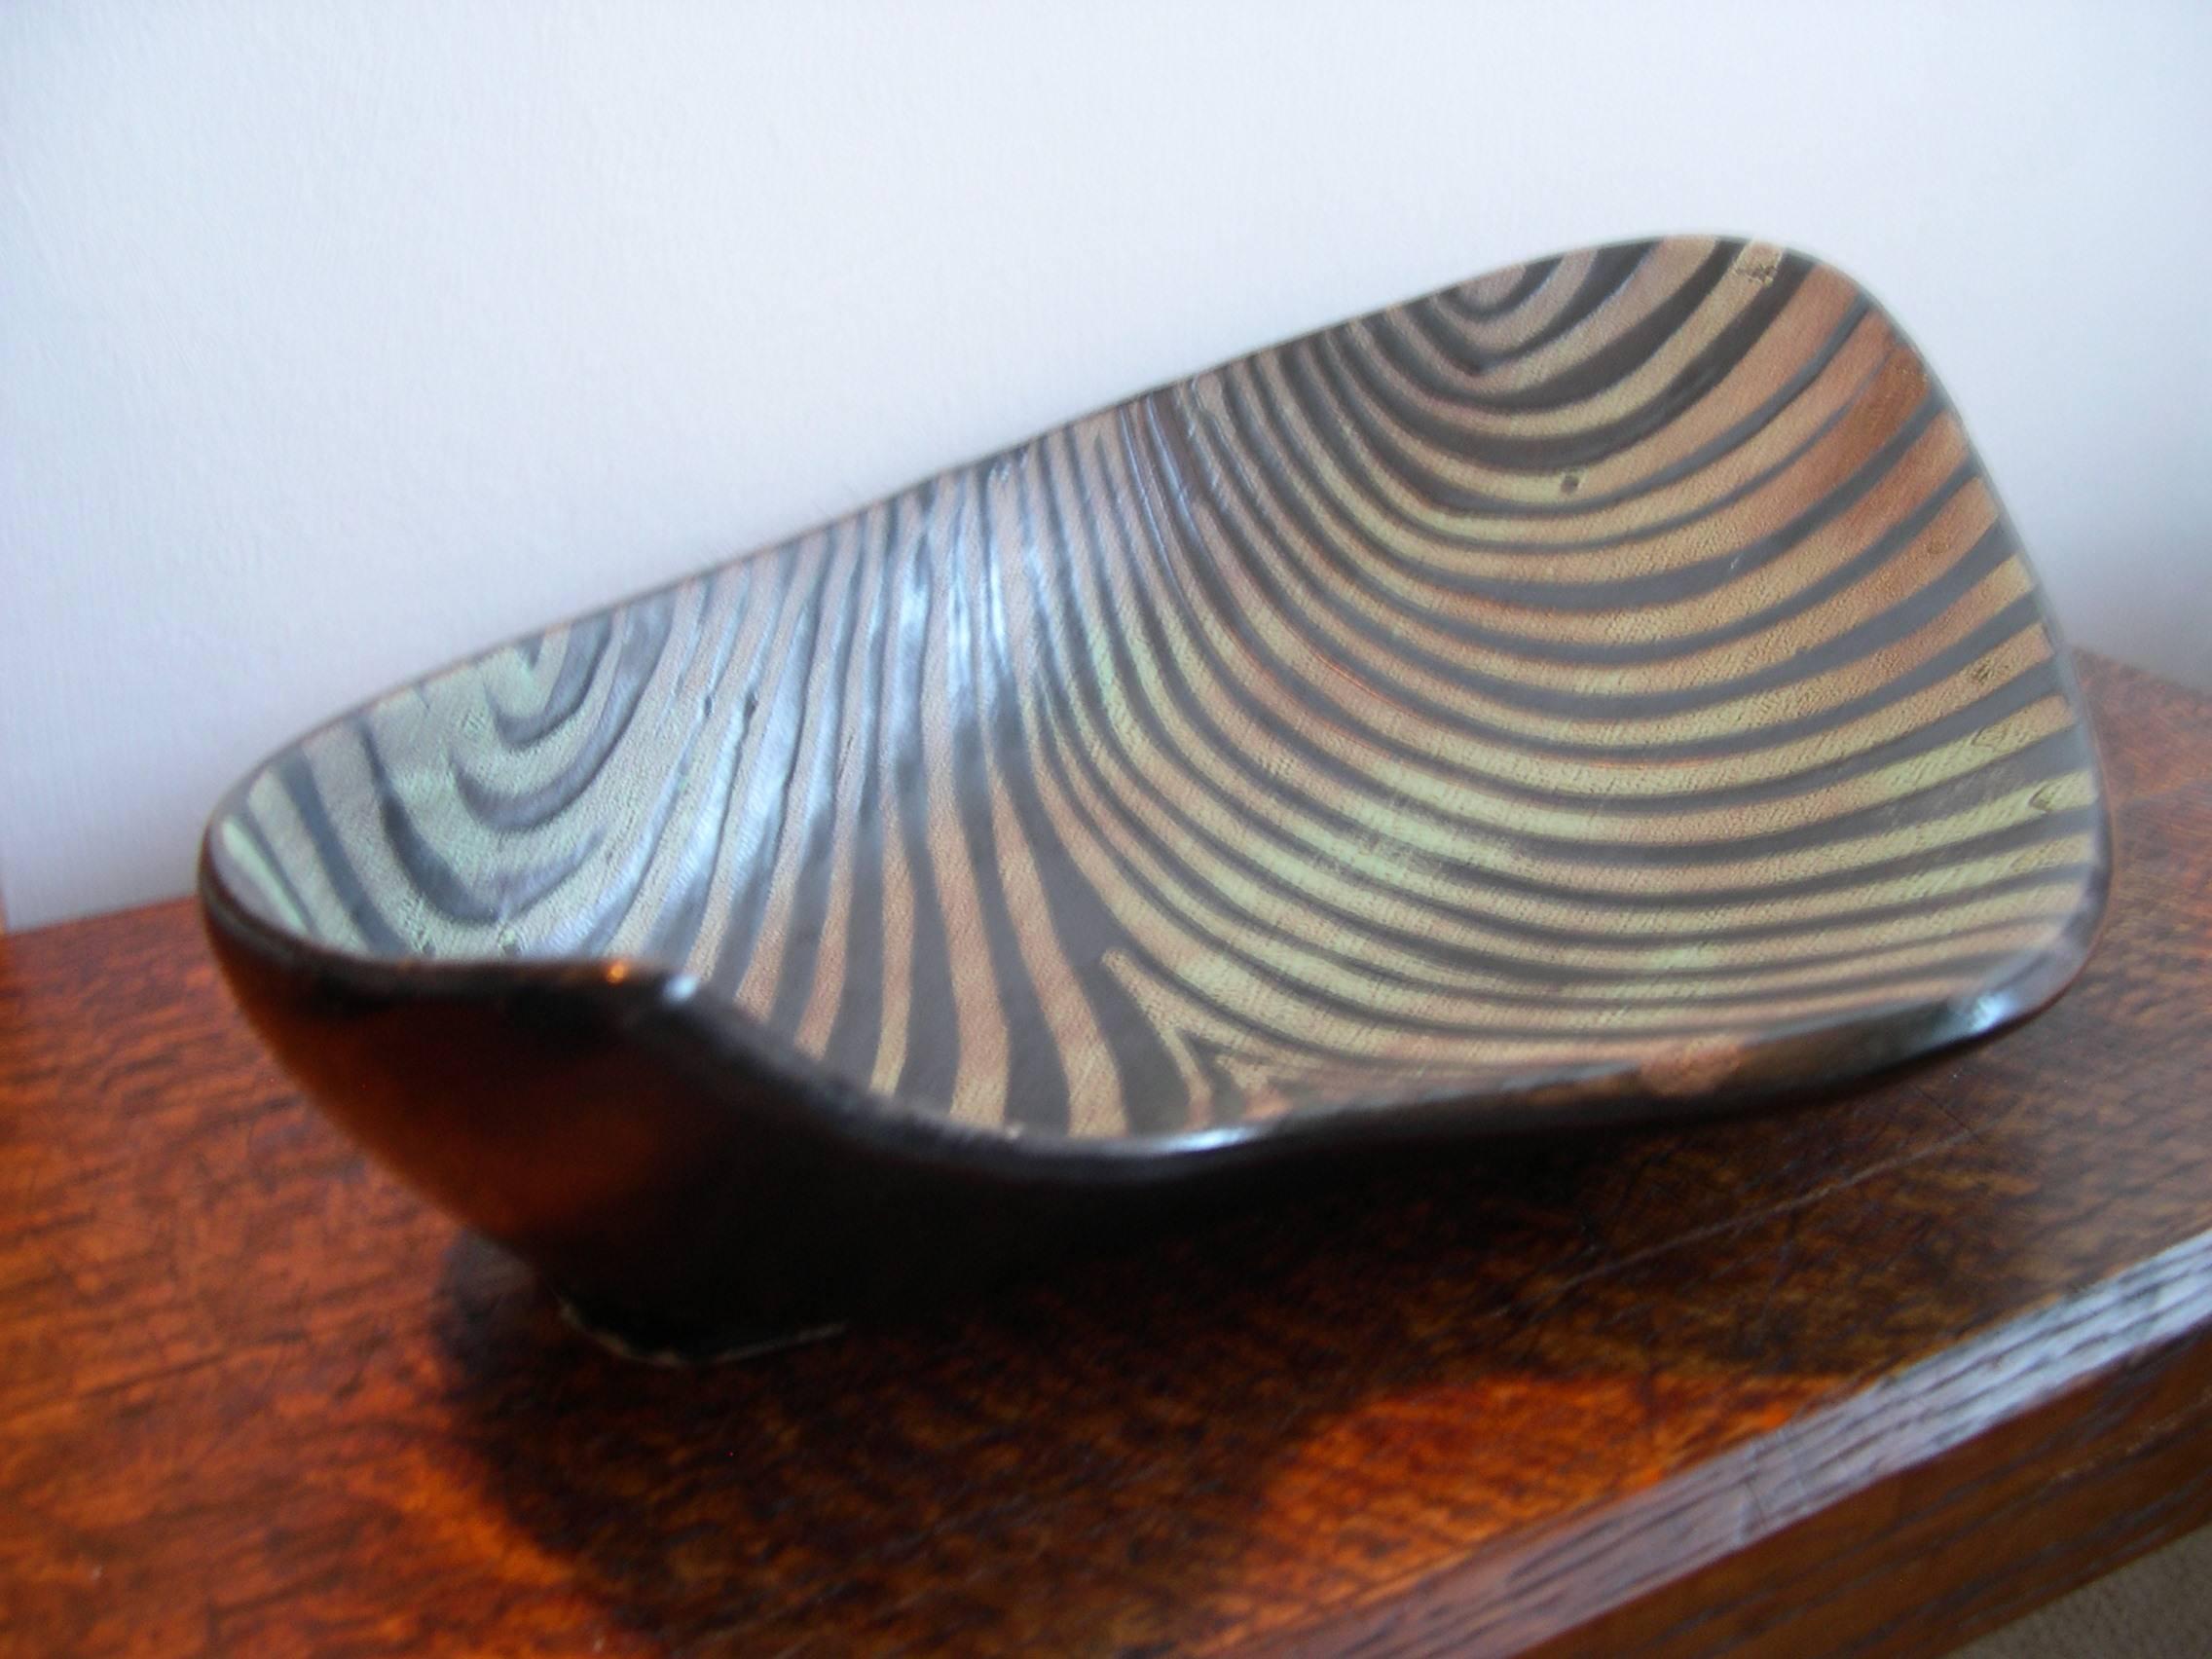 Rare large free-form dish by Roger Capron with wave effect painted glazes. Signature to base. This purely abstract decoration all-over the piece is unusual amongst Capron's oeuvre and dates to the last period in which he produced the wax resist